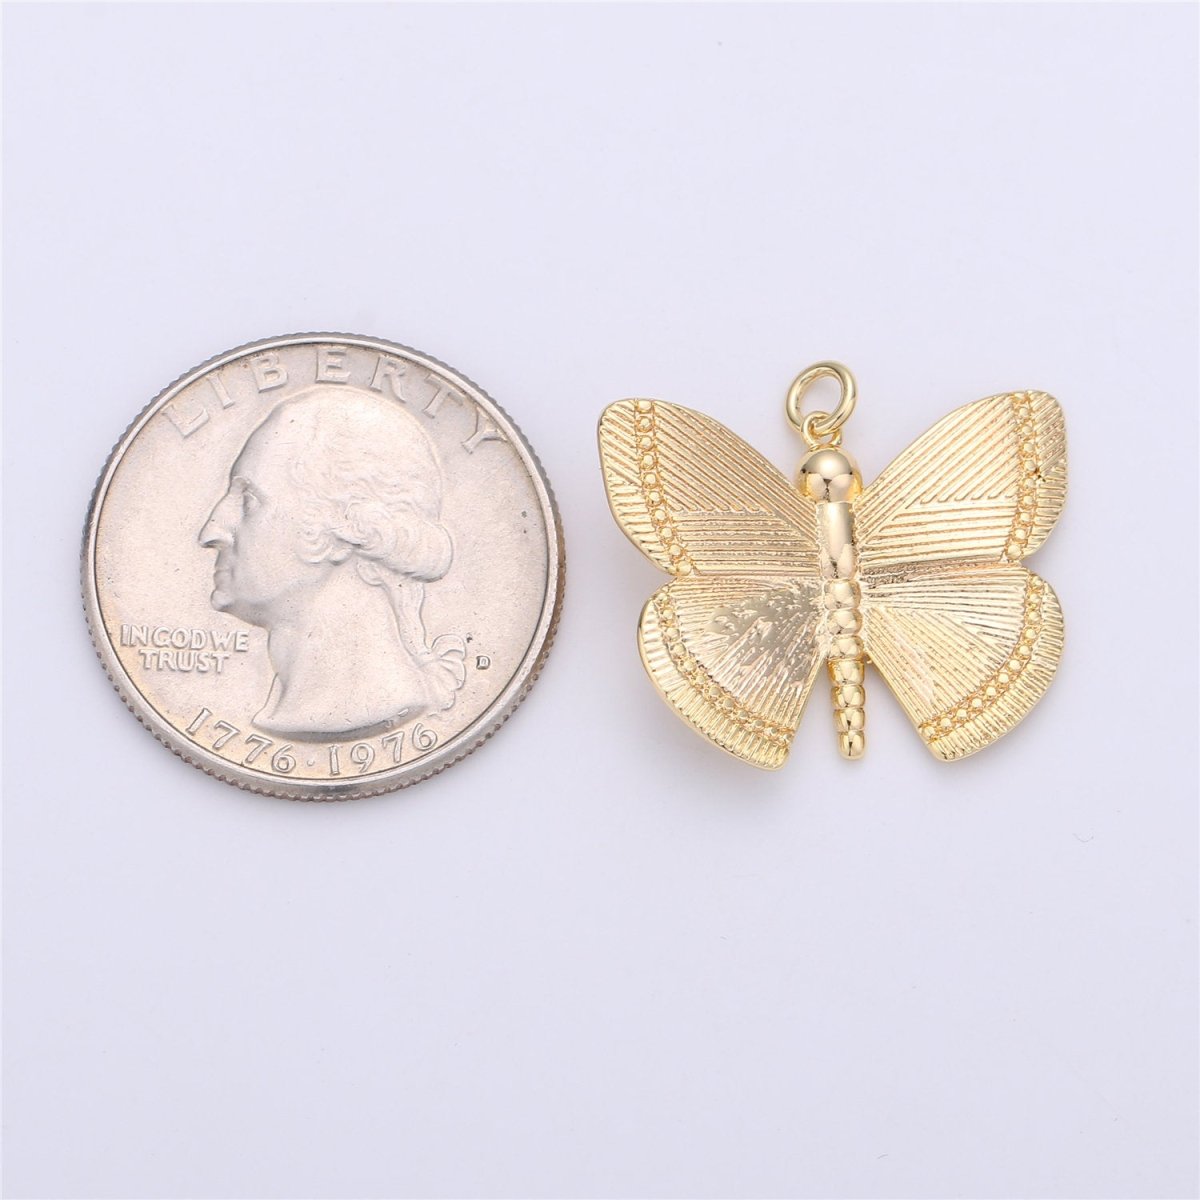 Dainty 14k Gold Filled Butterfly Pendant Gold Butterfly Charms for Bracelet, Earring, Necklace Charms for Jewelry Making Supply D-491 C-653 - DLUXCA